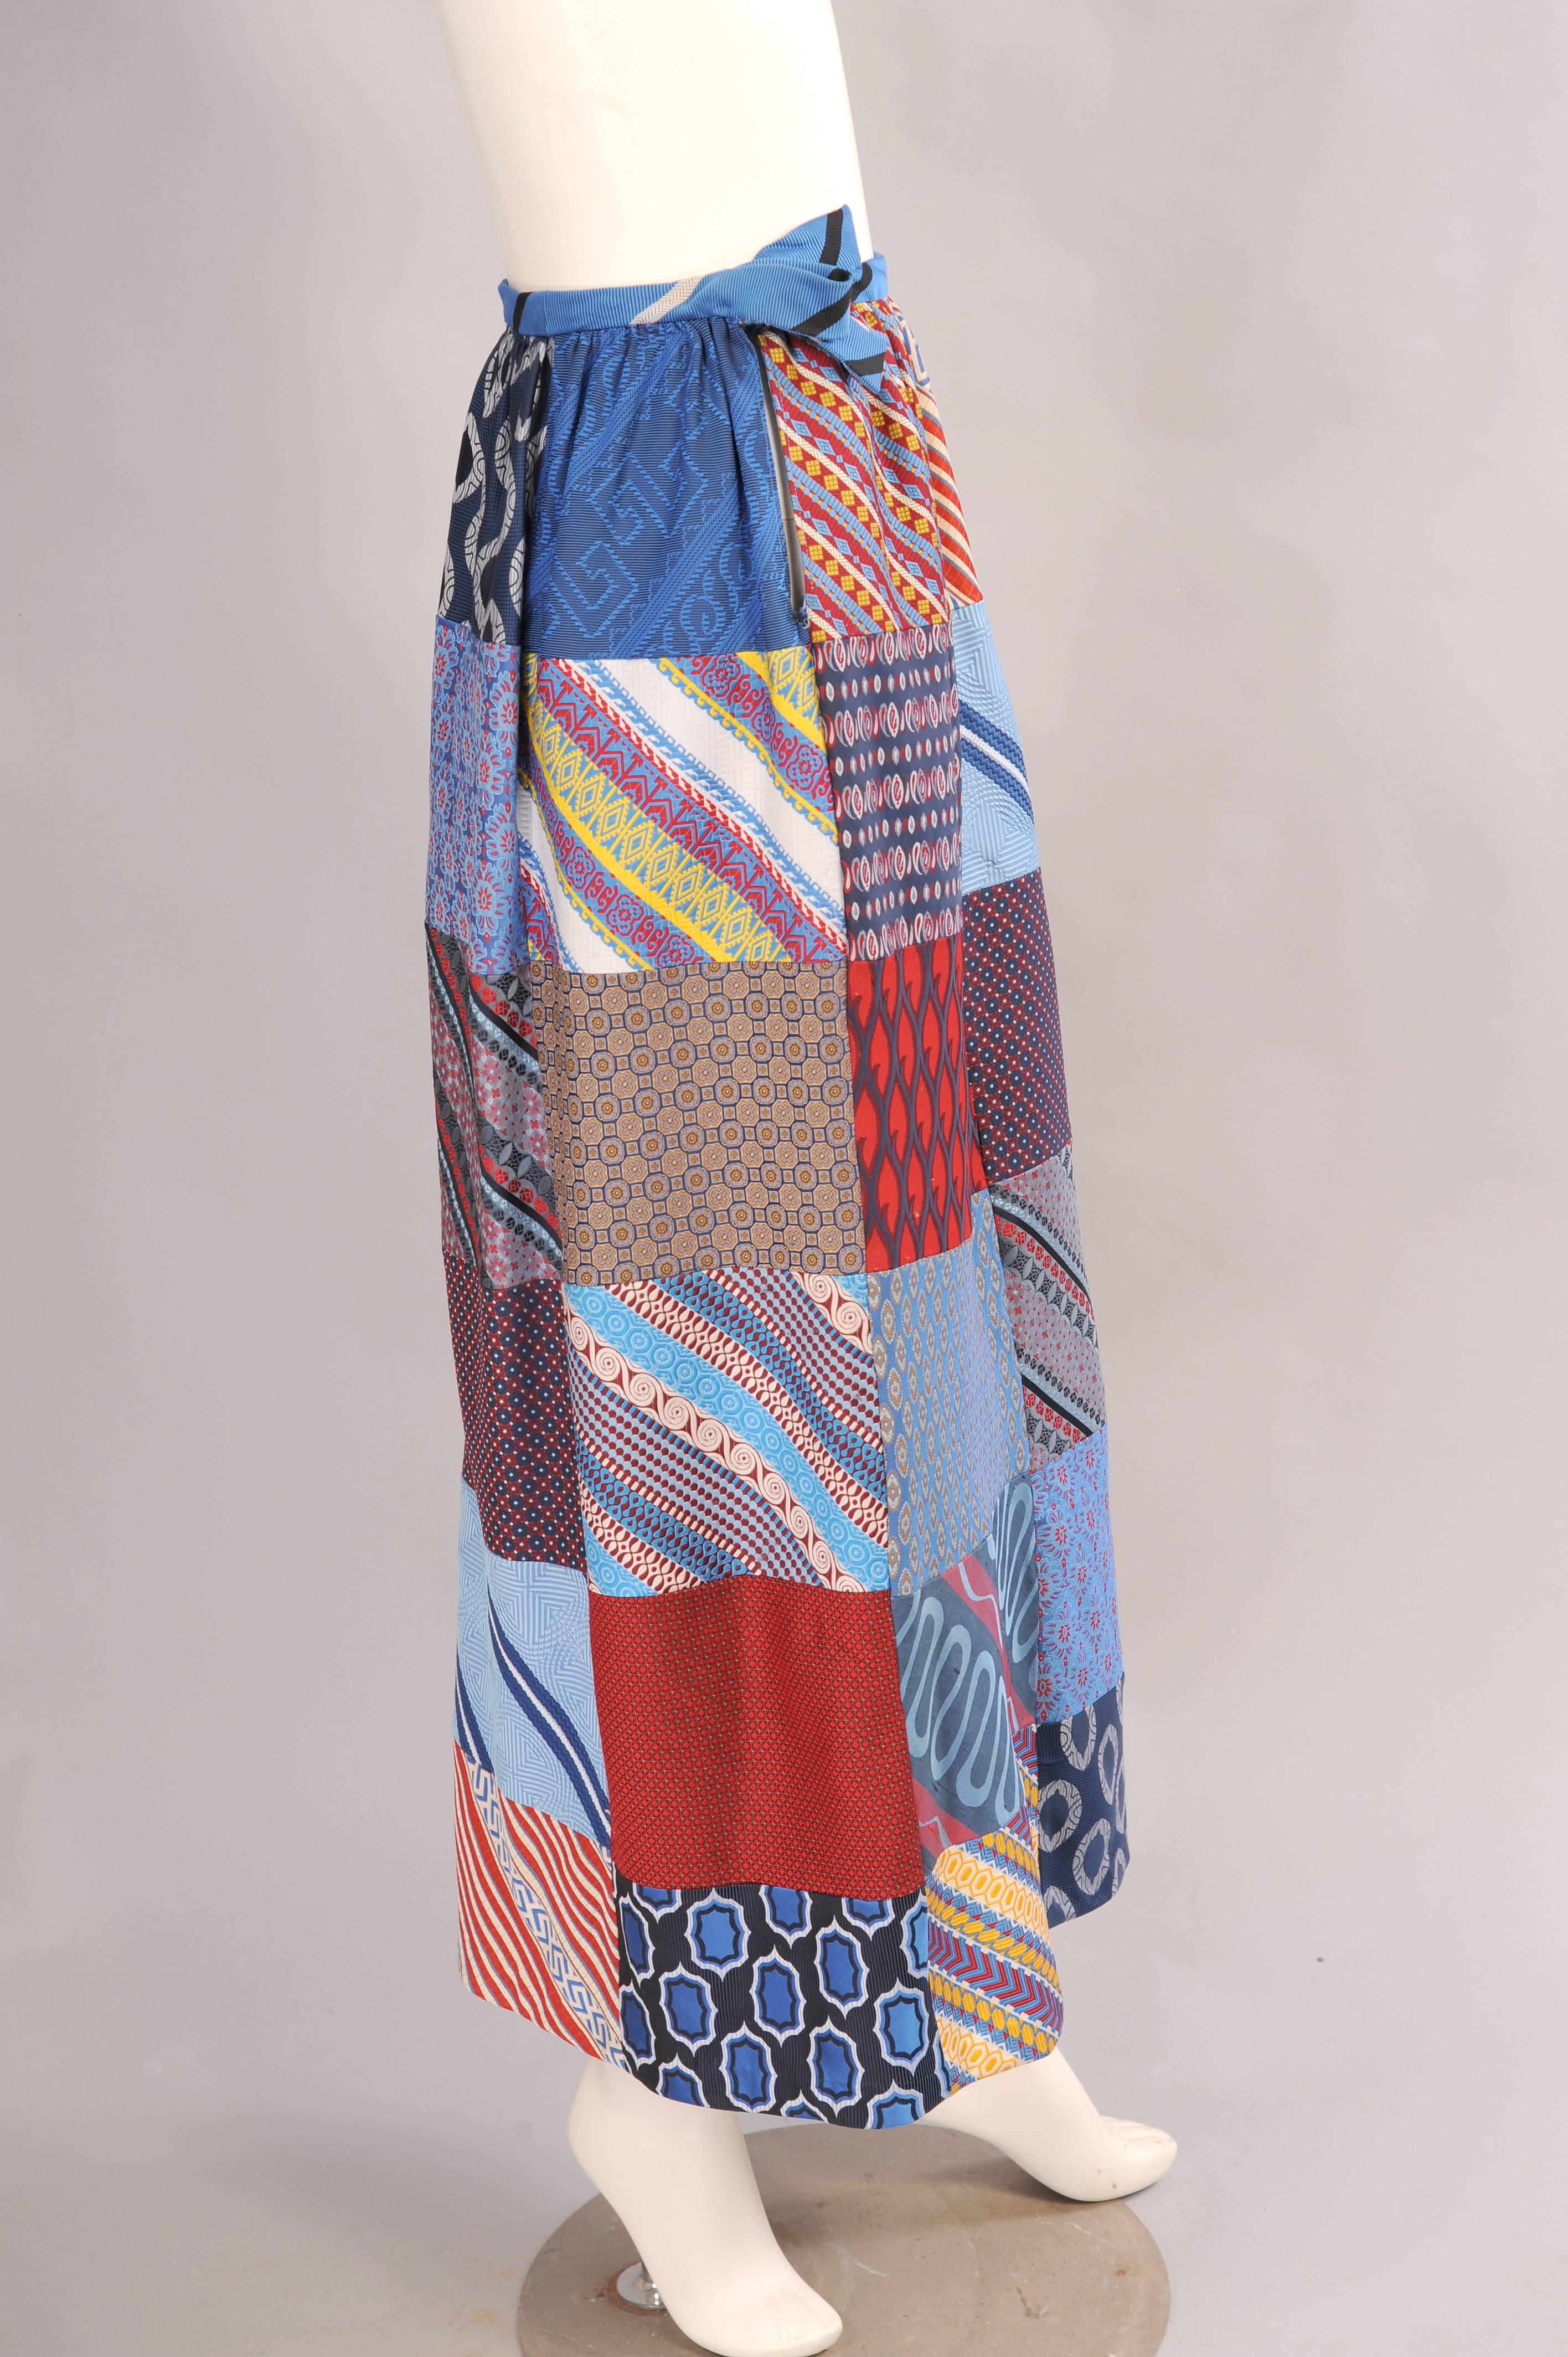 This fun patchwork maxi or evening skirt is made from silk necktie fabric. The waistband and decorative bow is made from another silk tie fabric. The skirt is fully lined and it is in excellent condition.
Measurements;
Waist 26"
Hips